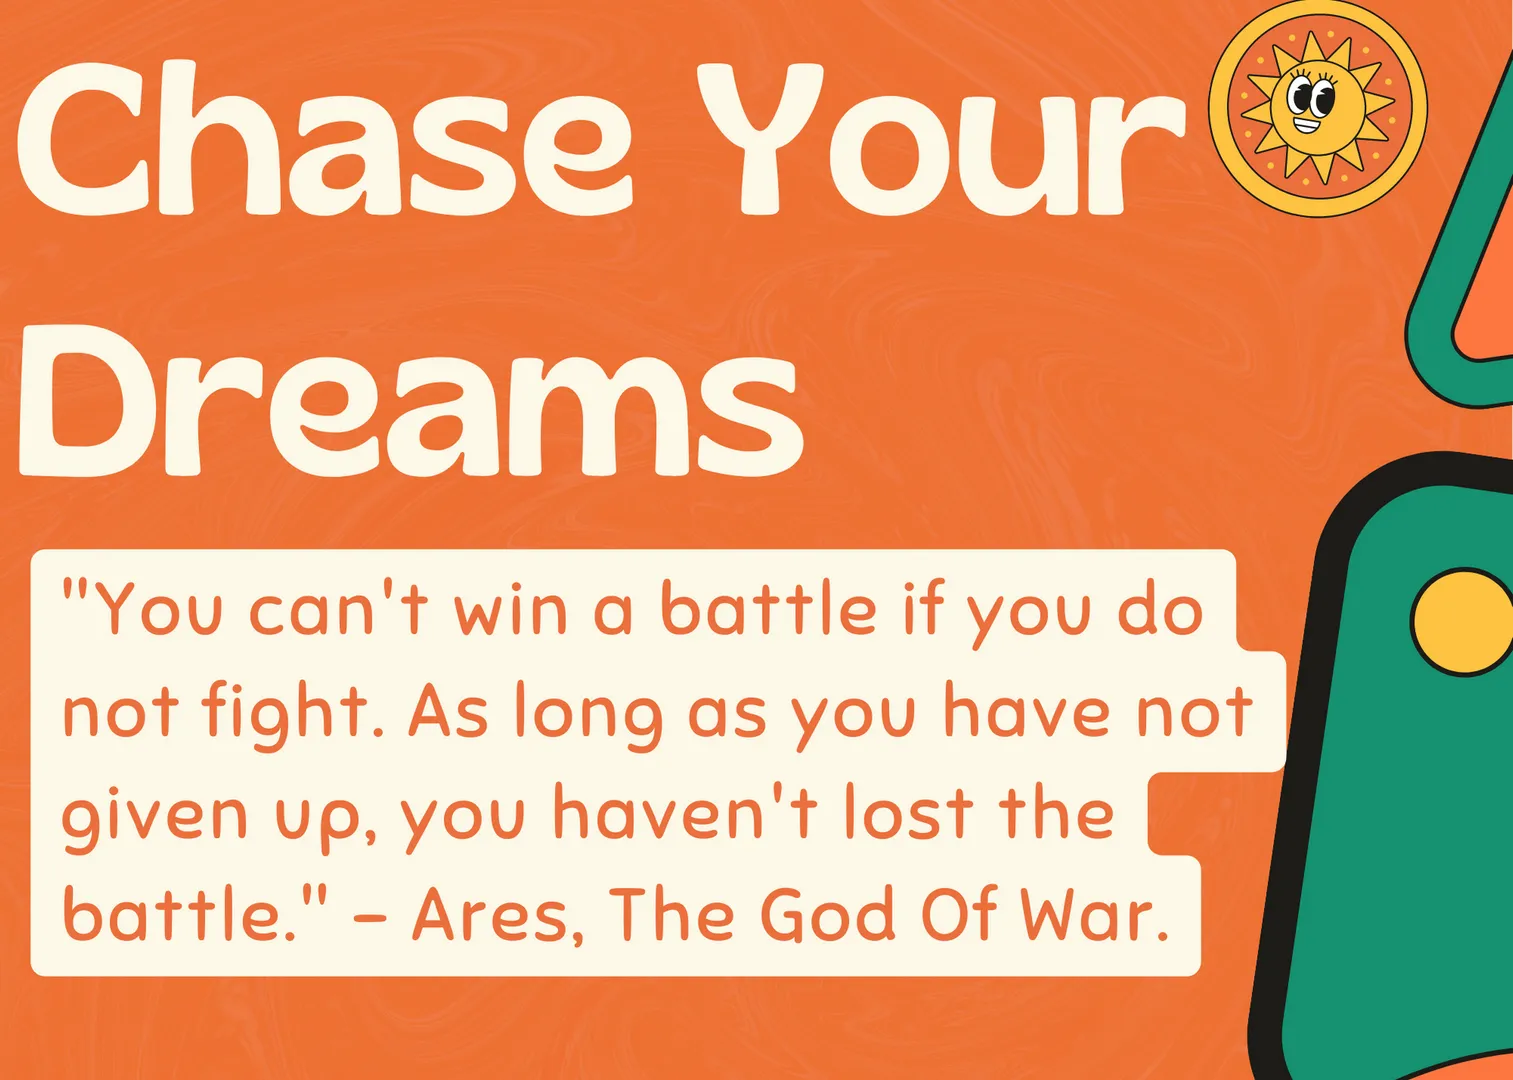 Godwrath Lore Quote: Chase Your Dreams
The quote can be found in the post's image.

Get today's quote on OpenSea for free! Make It yours!

https://opensea.io/assets/ethereum/0x495f947276749ce646f68ac8c248420045cb7b5e/54110518708055511570961916387100735752108288770146632882064646508880859240304

#quotes #lore #crypto #quote #NFTart #wisdom #blockchain #nft #nfts #Gamedev #Nftartist #Opensea #wisewords #wisdom #truth #inspire #inspiration #Inspirational #motivational #motivationalspeech #motivation #inspirationalquotes 